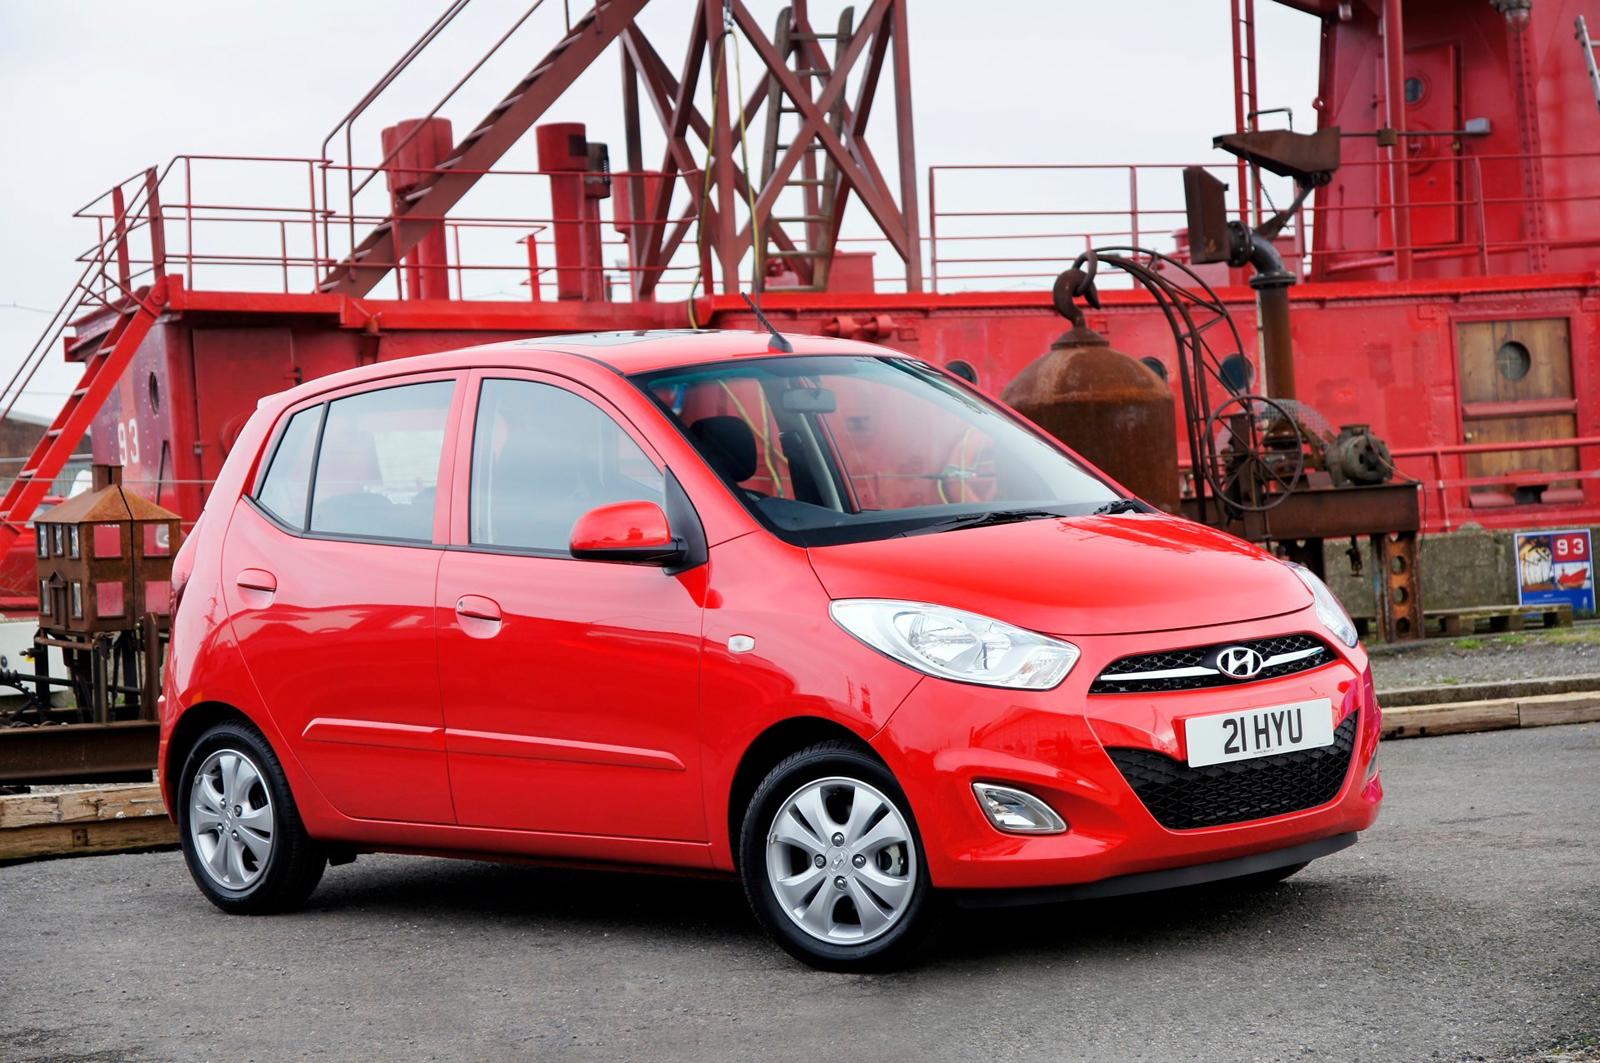 Hyundai i10 facelift 2011 photo 65902 pictures at high resolution